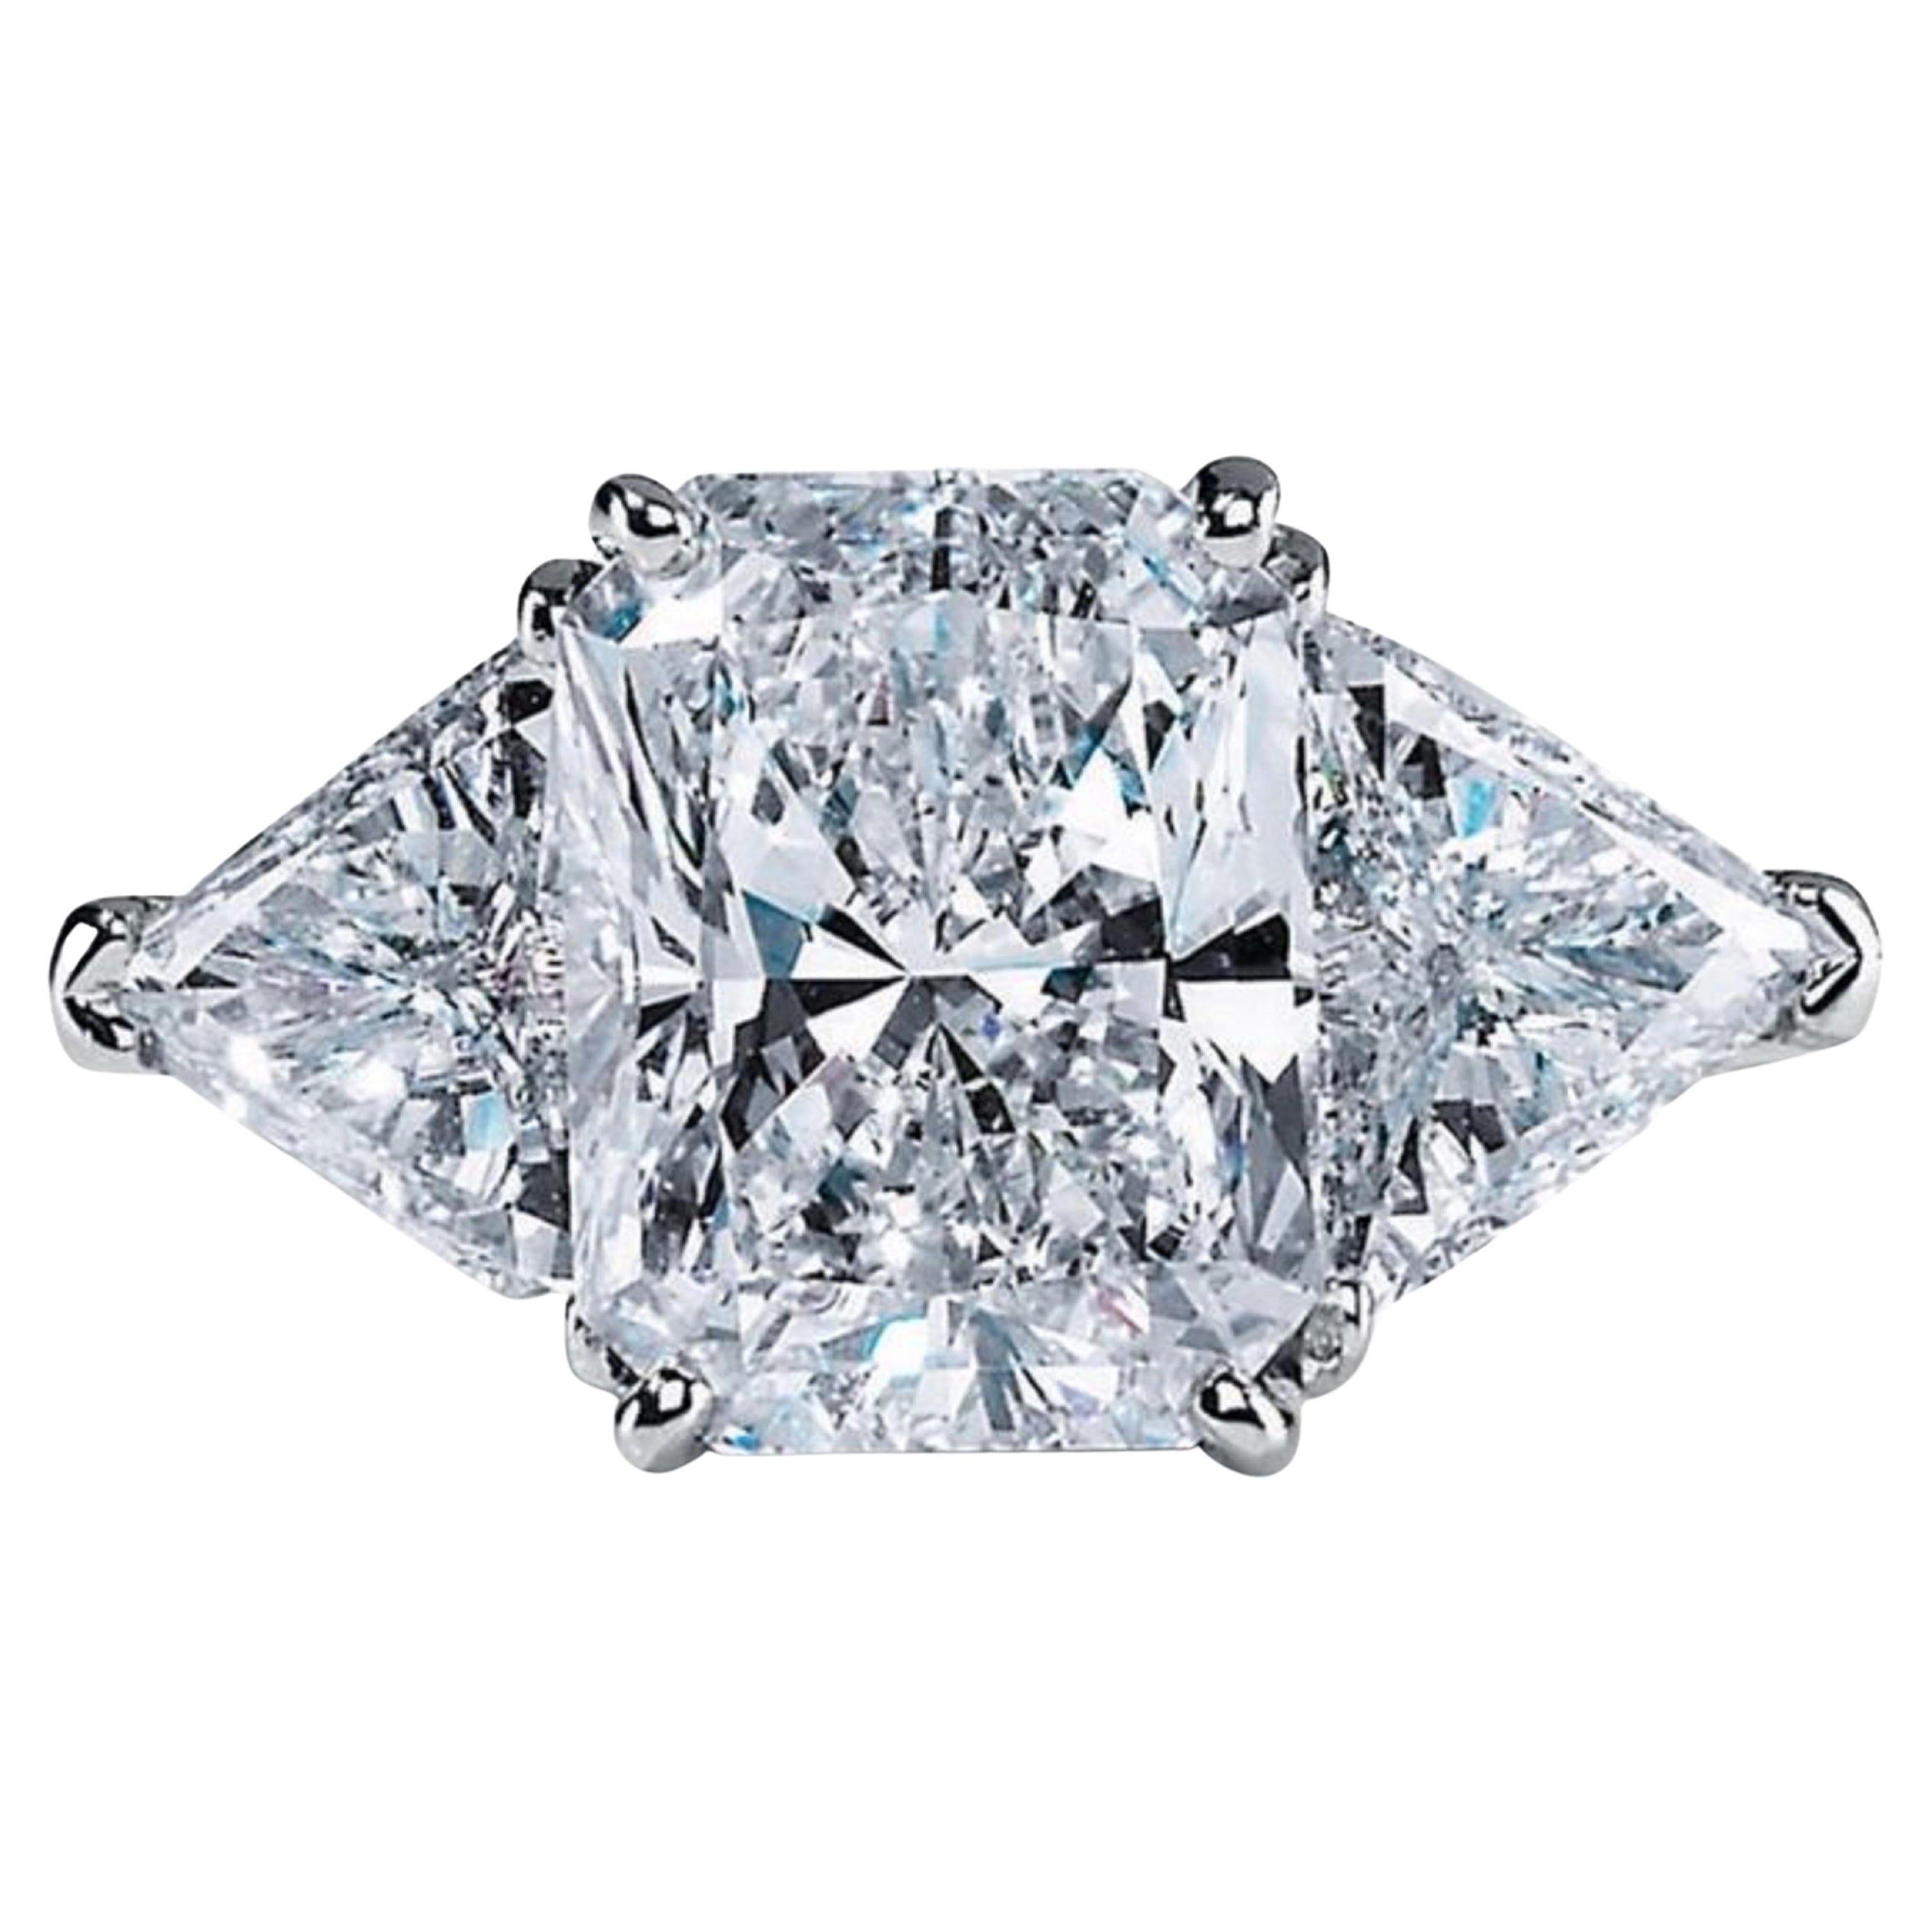 GIA Certified Three Stone Radiant Trillion Cut Diamond Ring For Sale